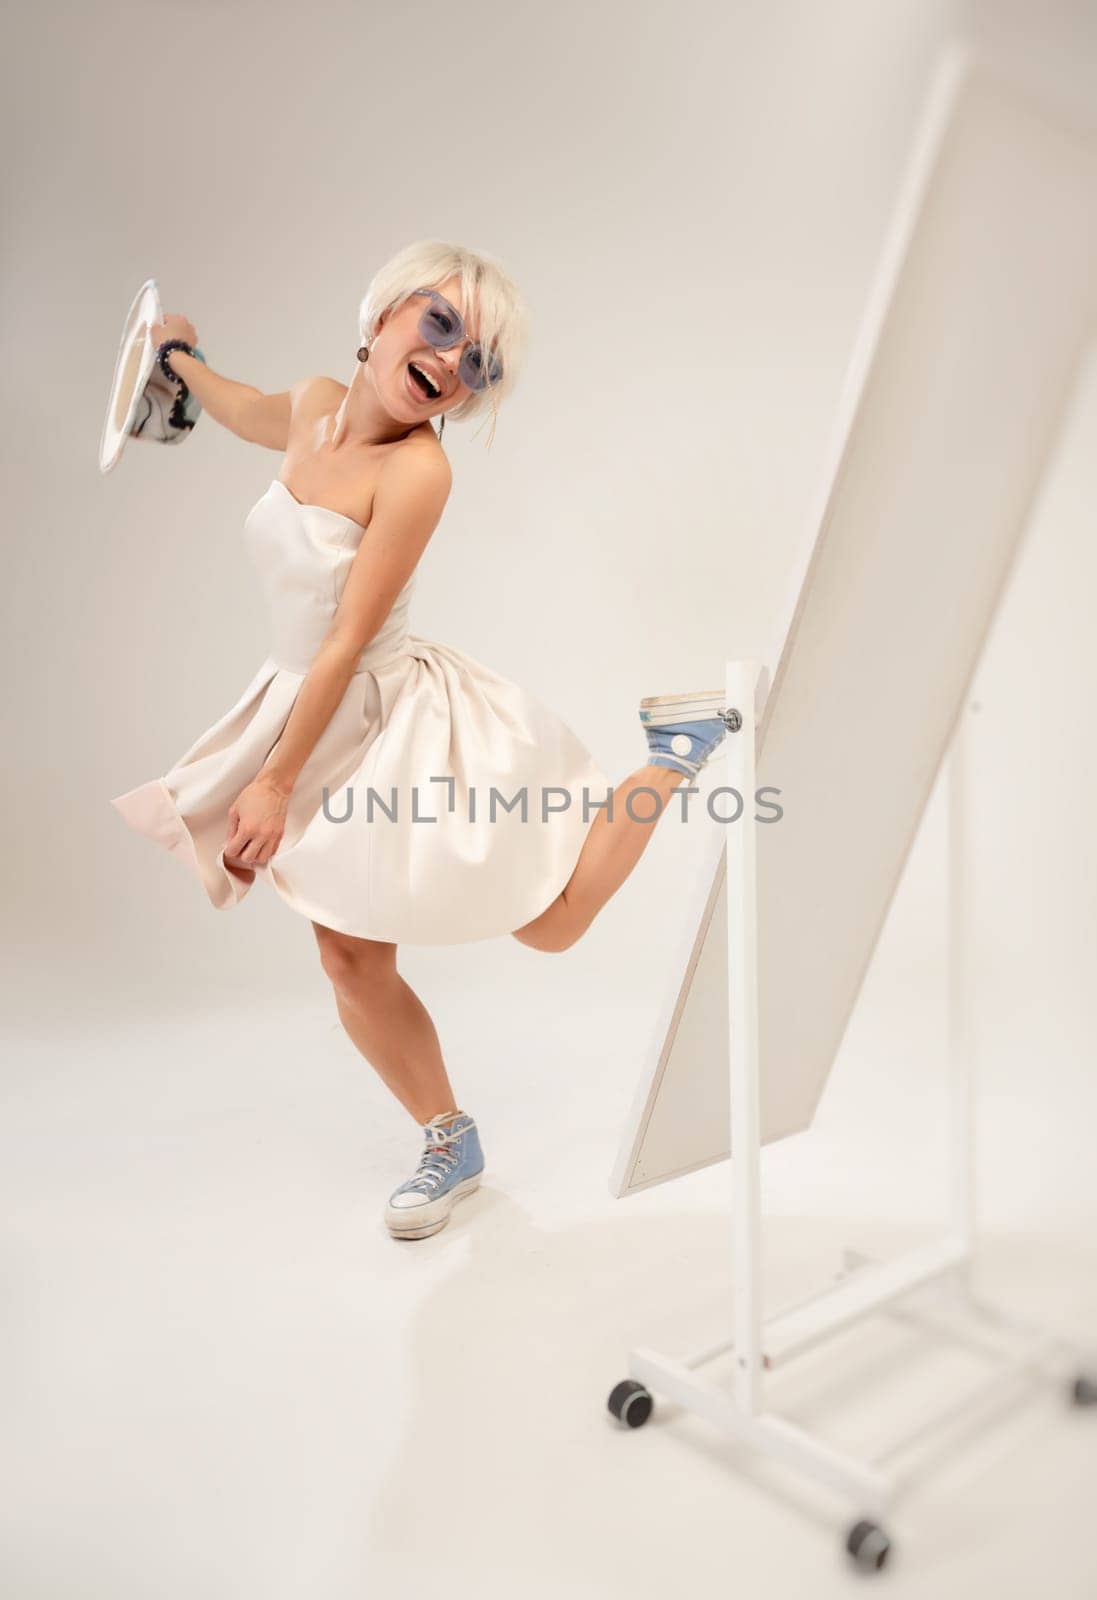 A naughty fashionable girl in a dress is fooling around and dancing in front of a mirror in a studio with a white background copy paste